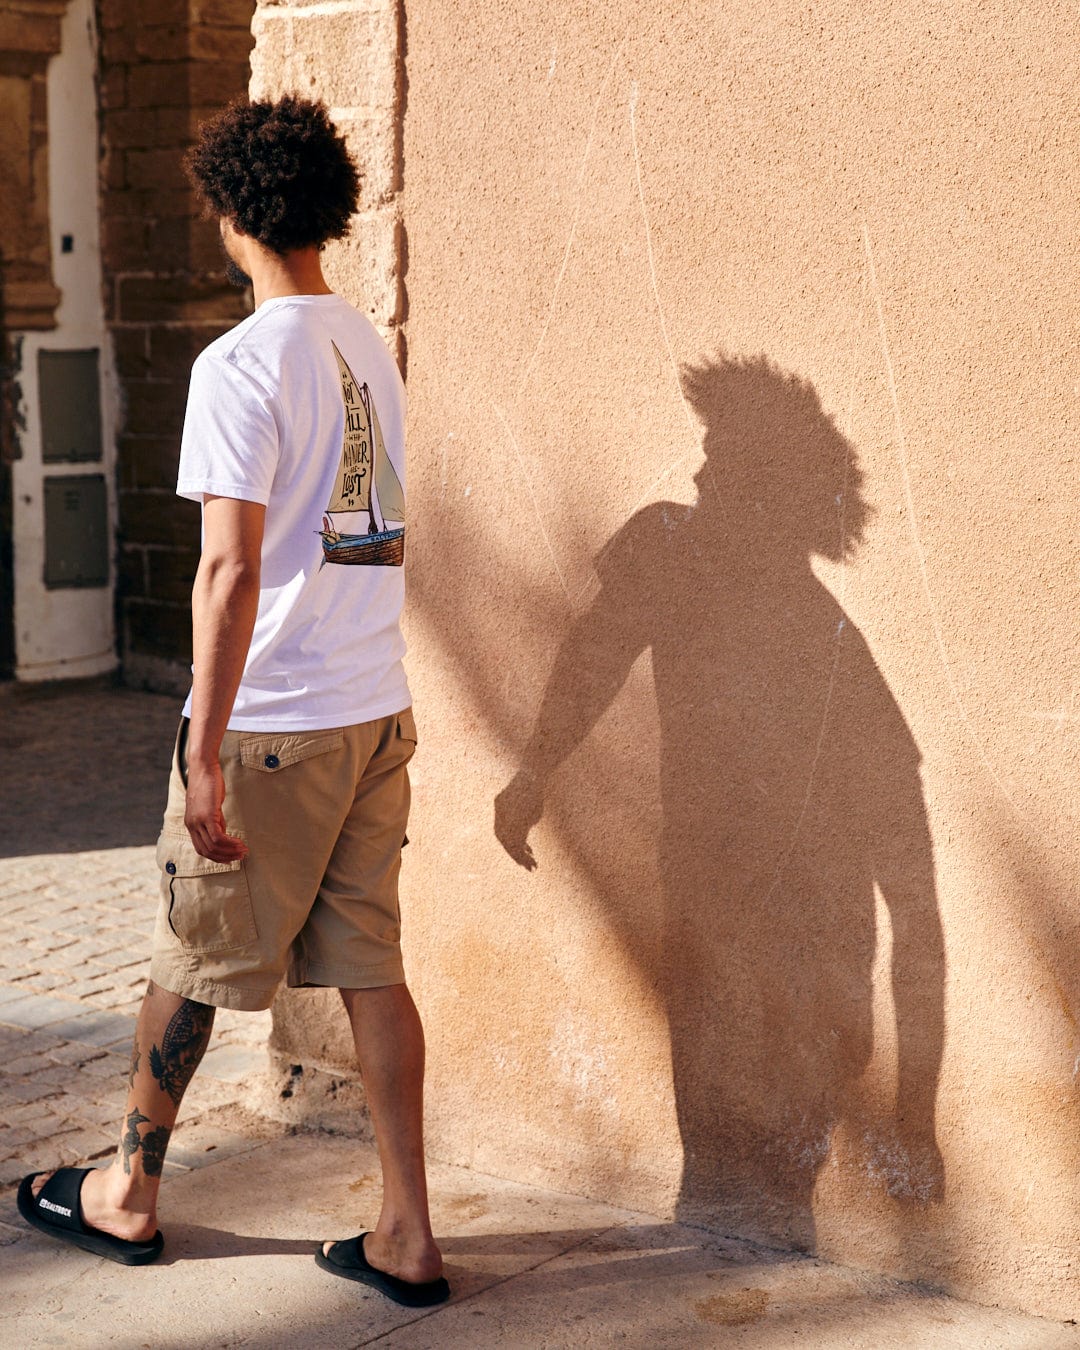 A young man with curly hair looks at his shadow on a sunlit beige wall, wearing a Saltrock Lost Ships Short Sleeve T-Shirt in White, khaki shorts, and sandals.